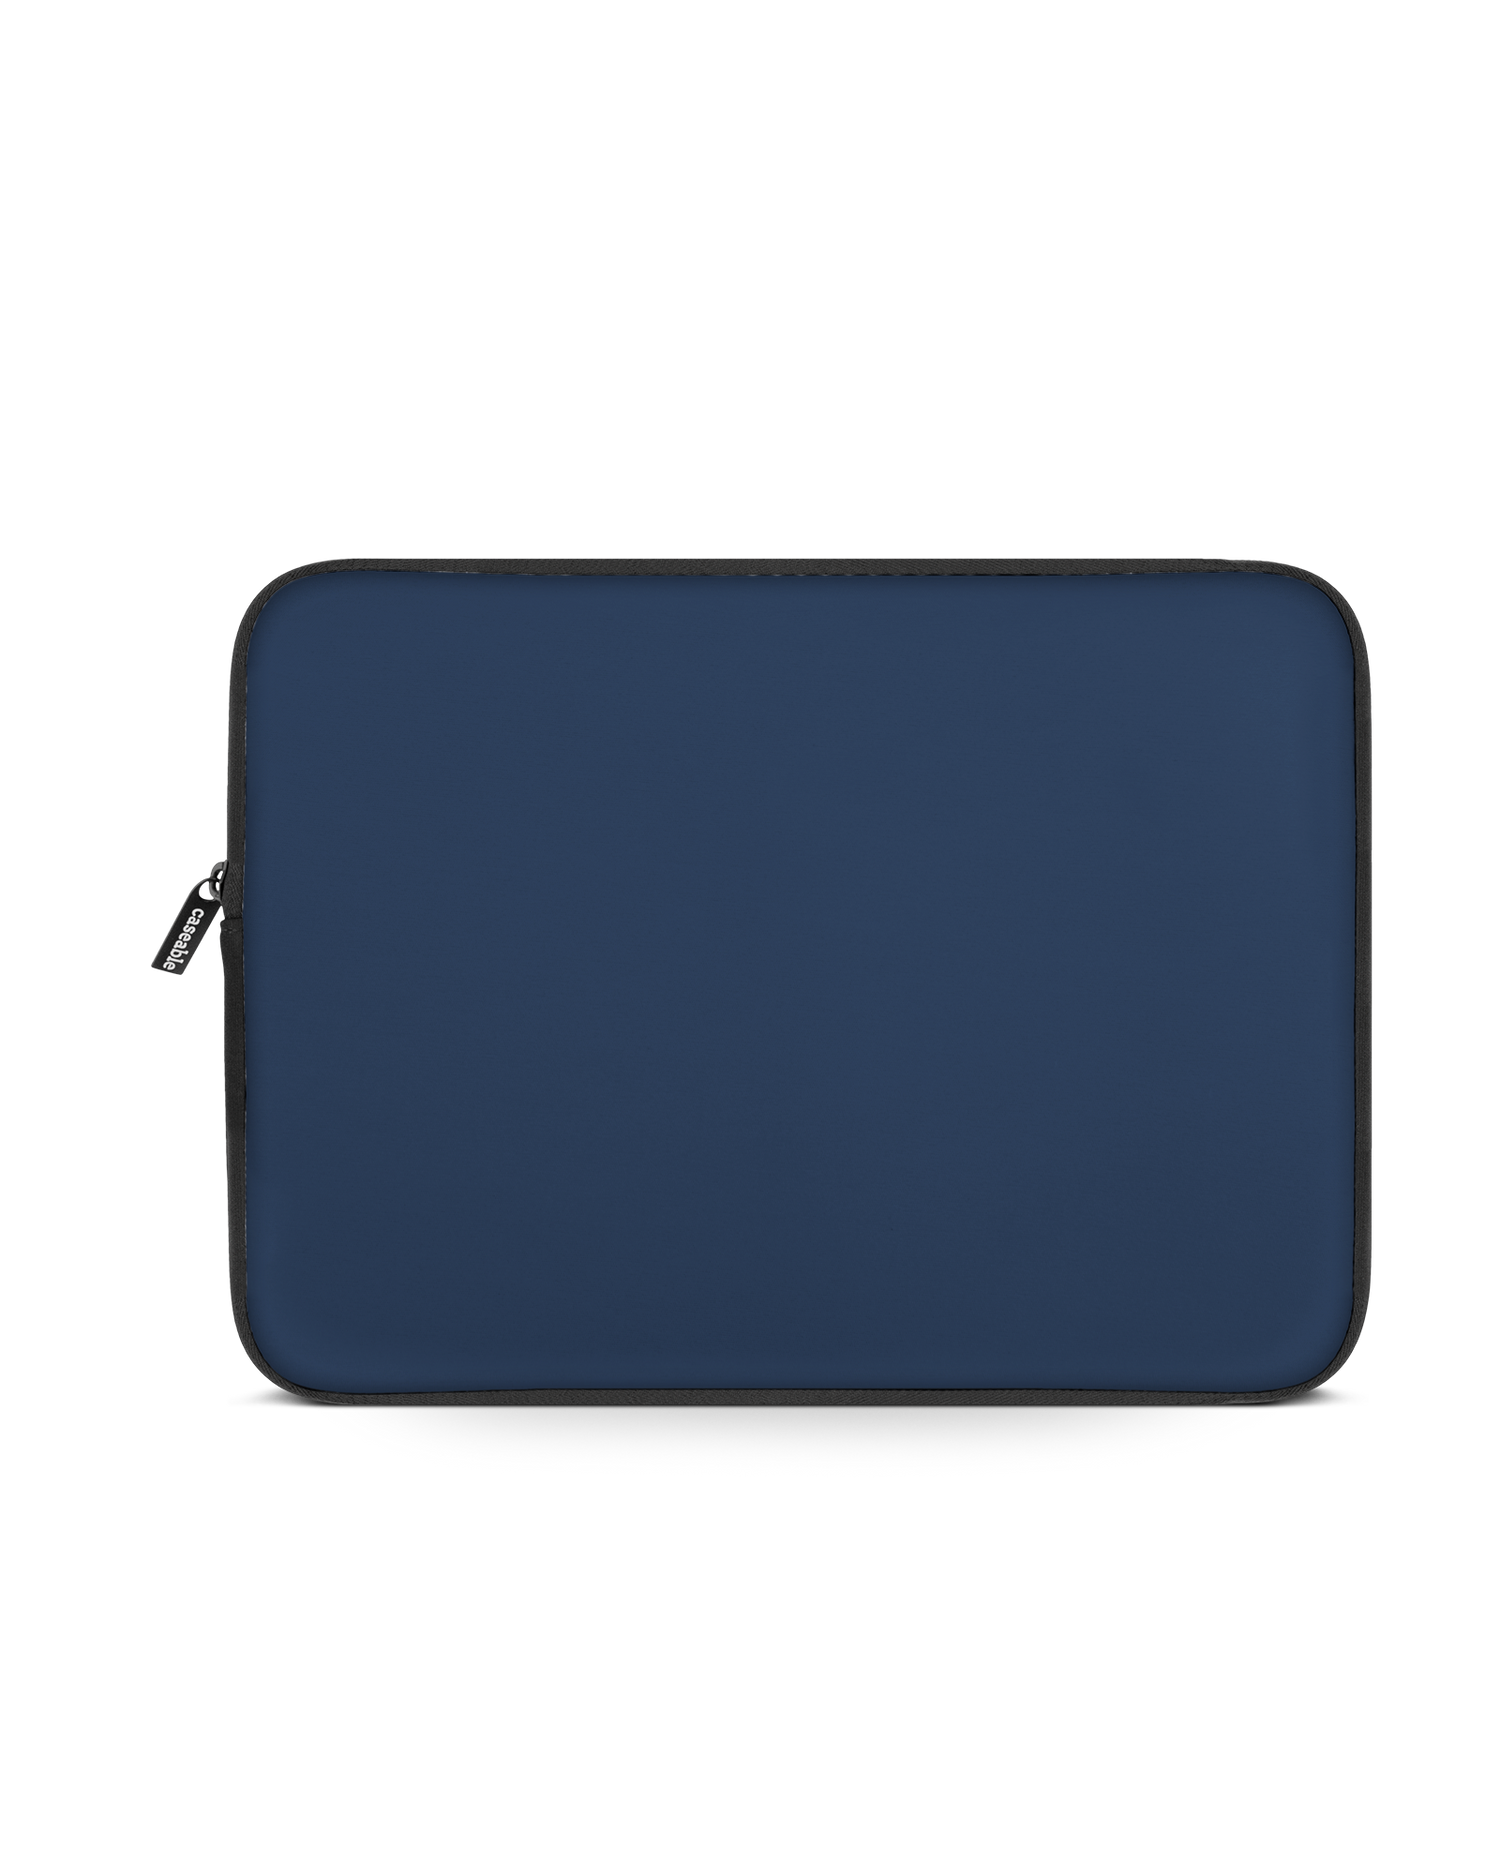 NAVY Laptop Case 13 inch: Front View